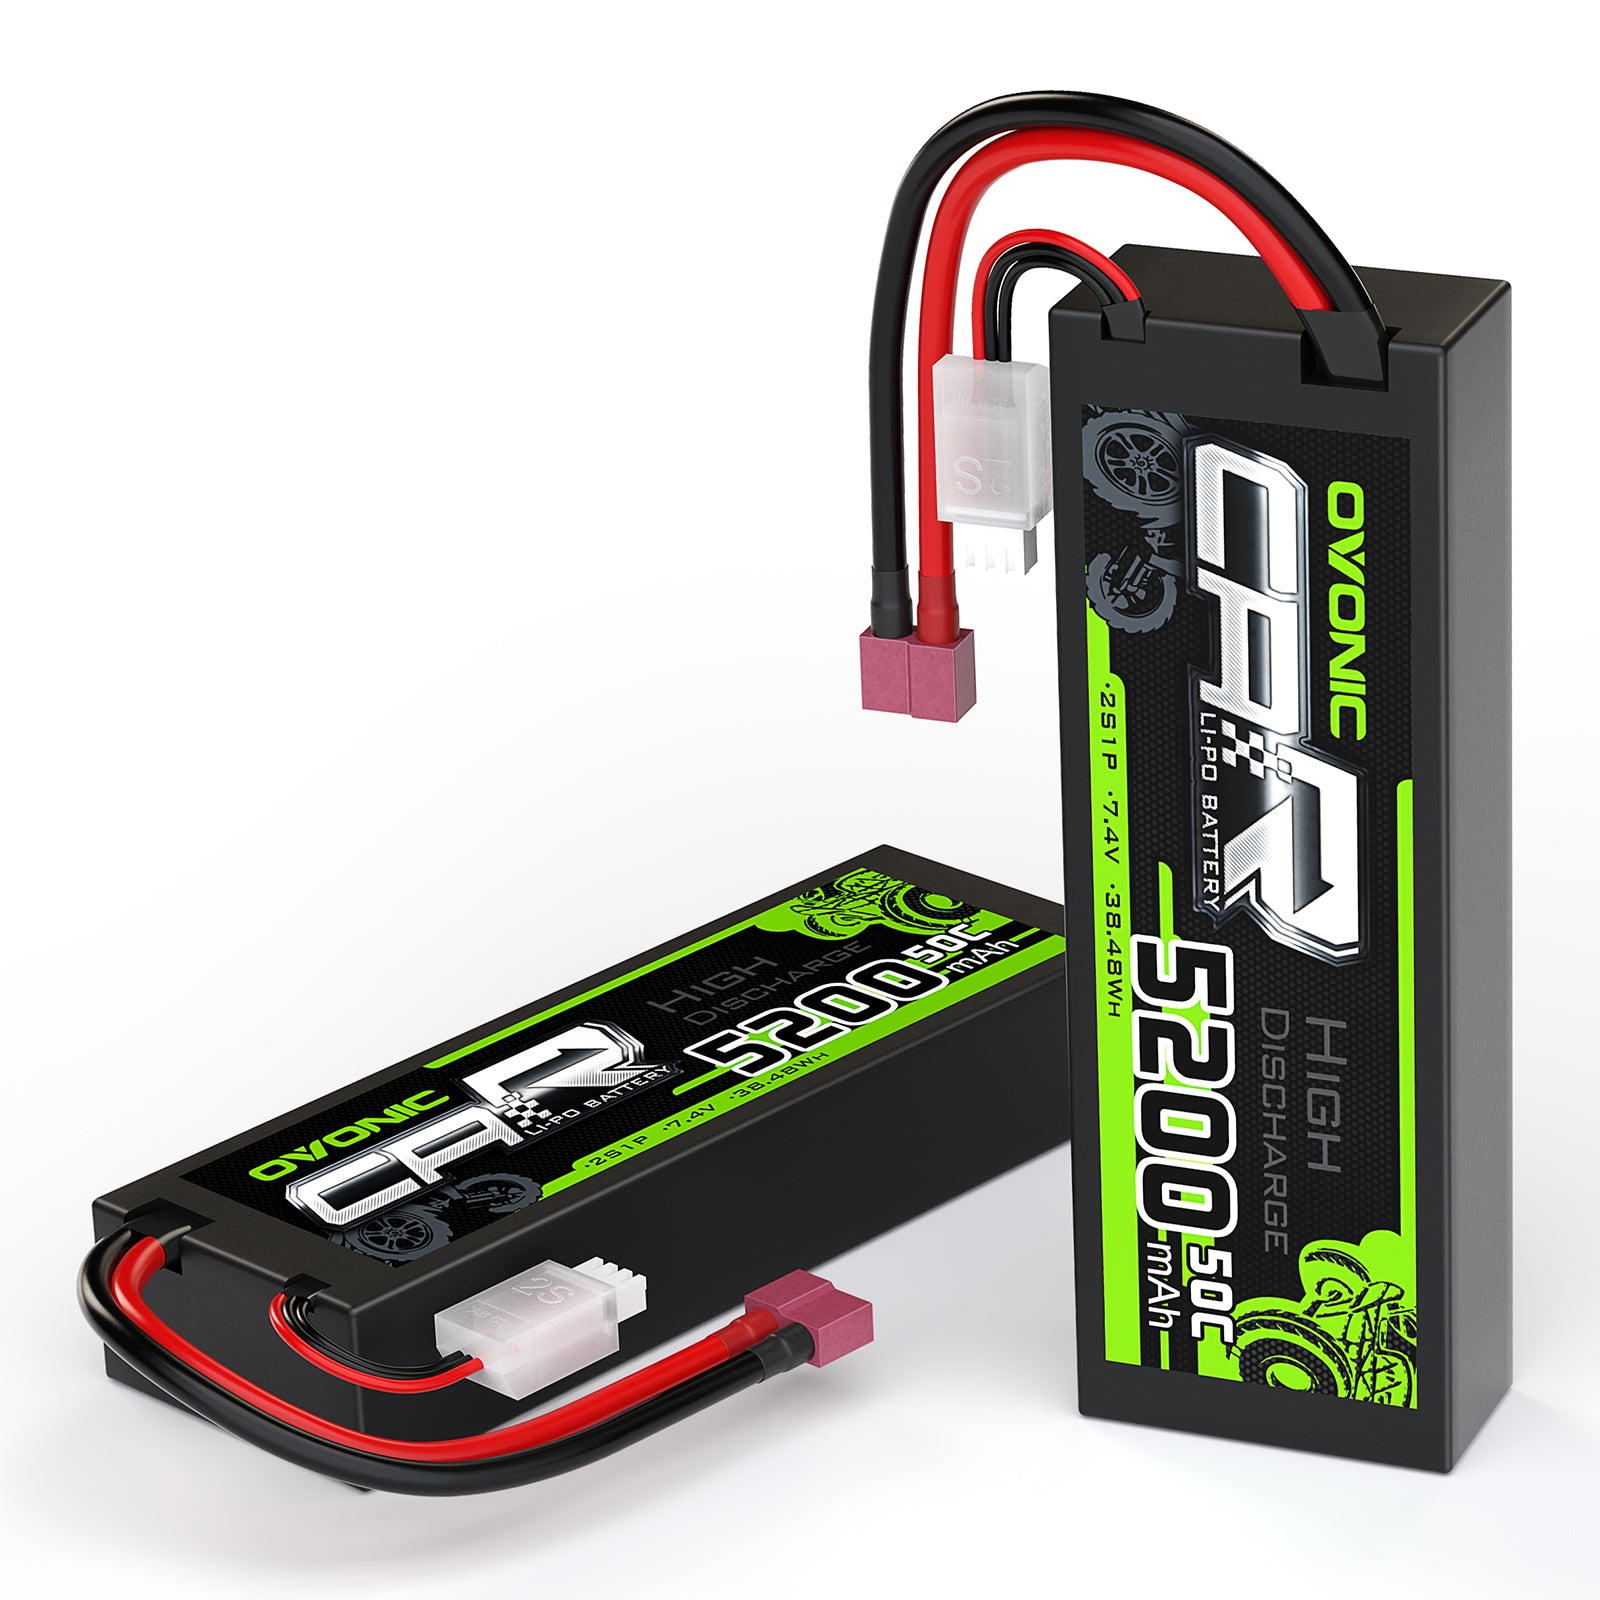 2×Ovonic 50C 2S 5200mAh LiPo Battery 7.4V Hardcase Deans Plug for RC – Ampow